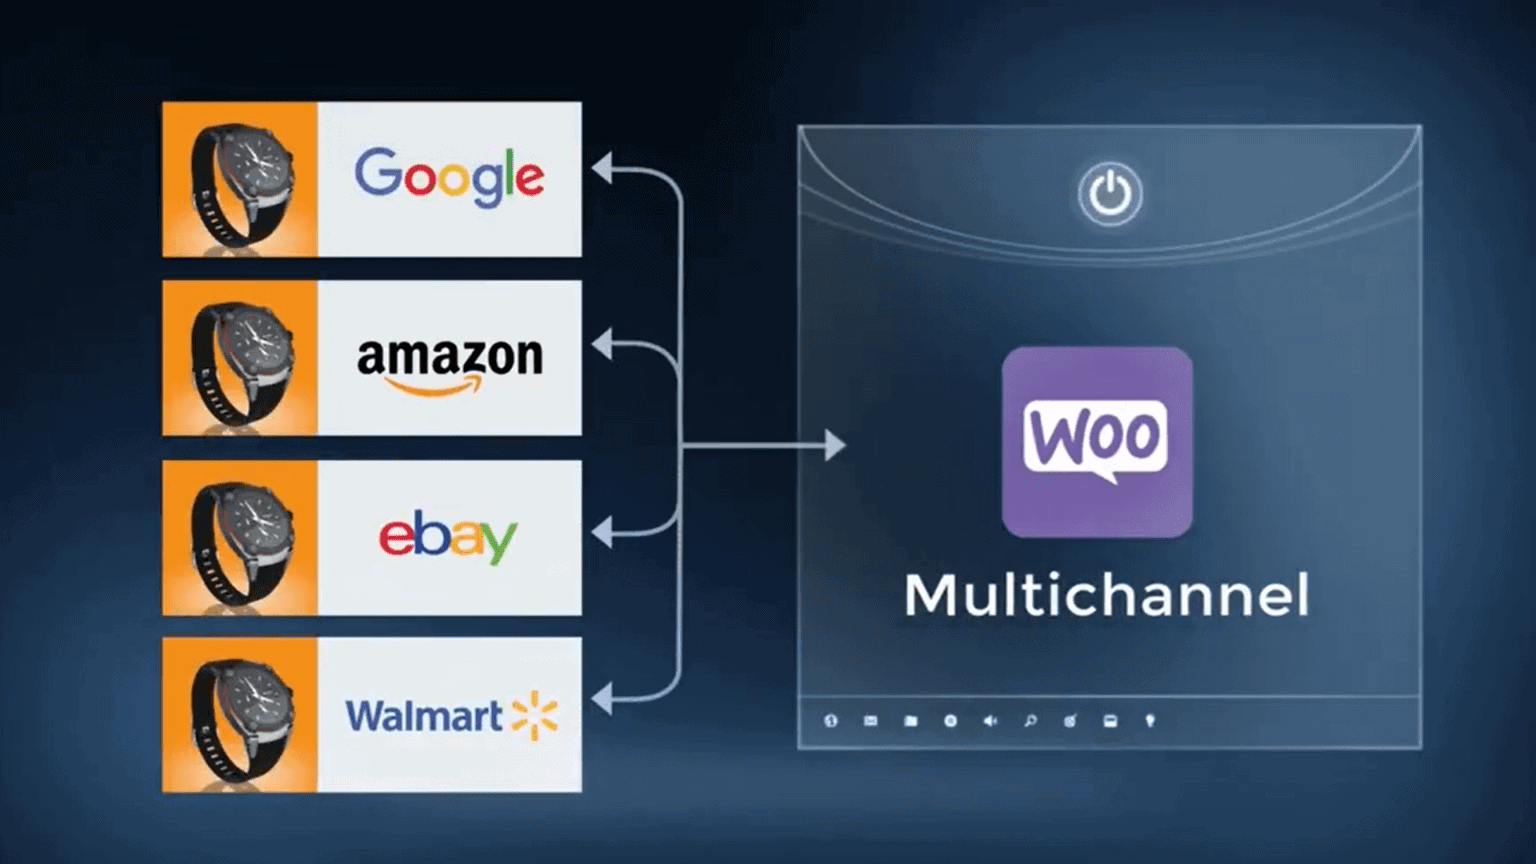 1. Multichannel For WooCommerce